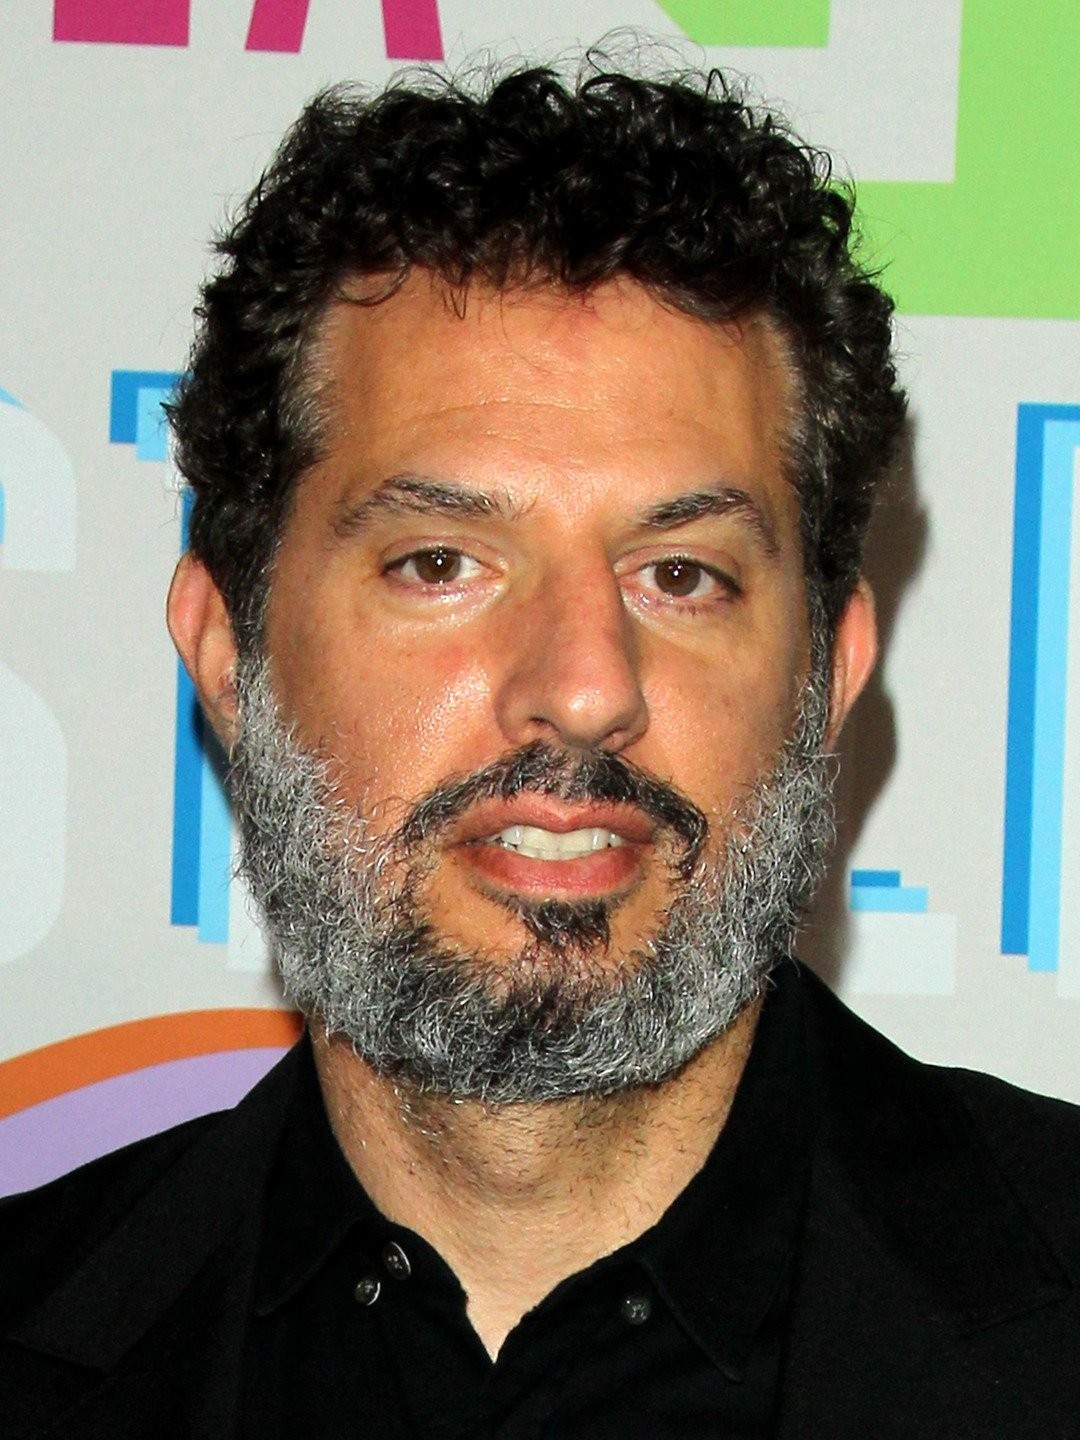 Madonna, U2 Manager Guy Oseary 'Steps Down' From Running Maverick